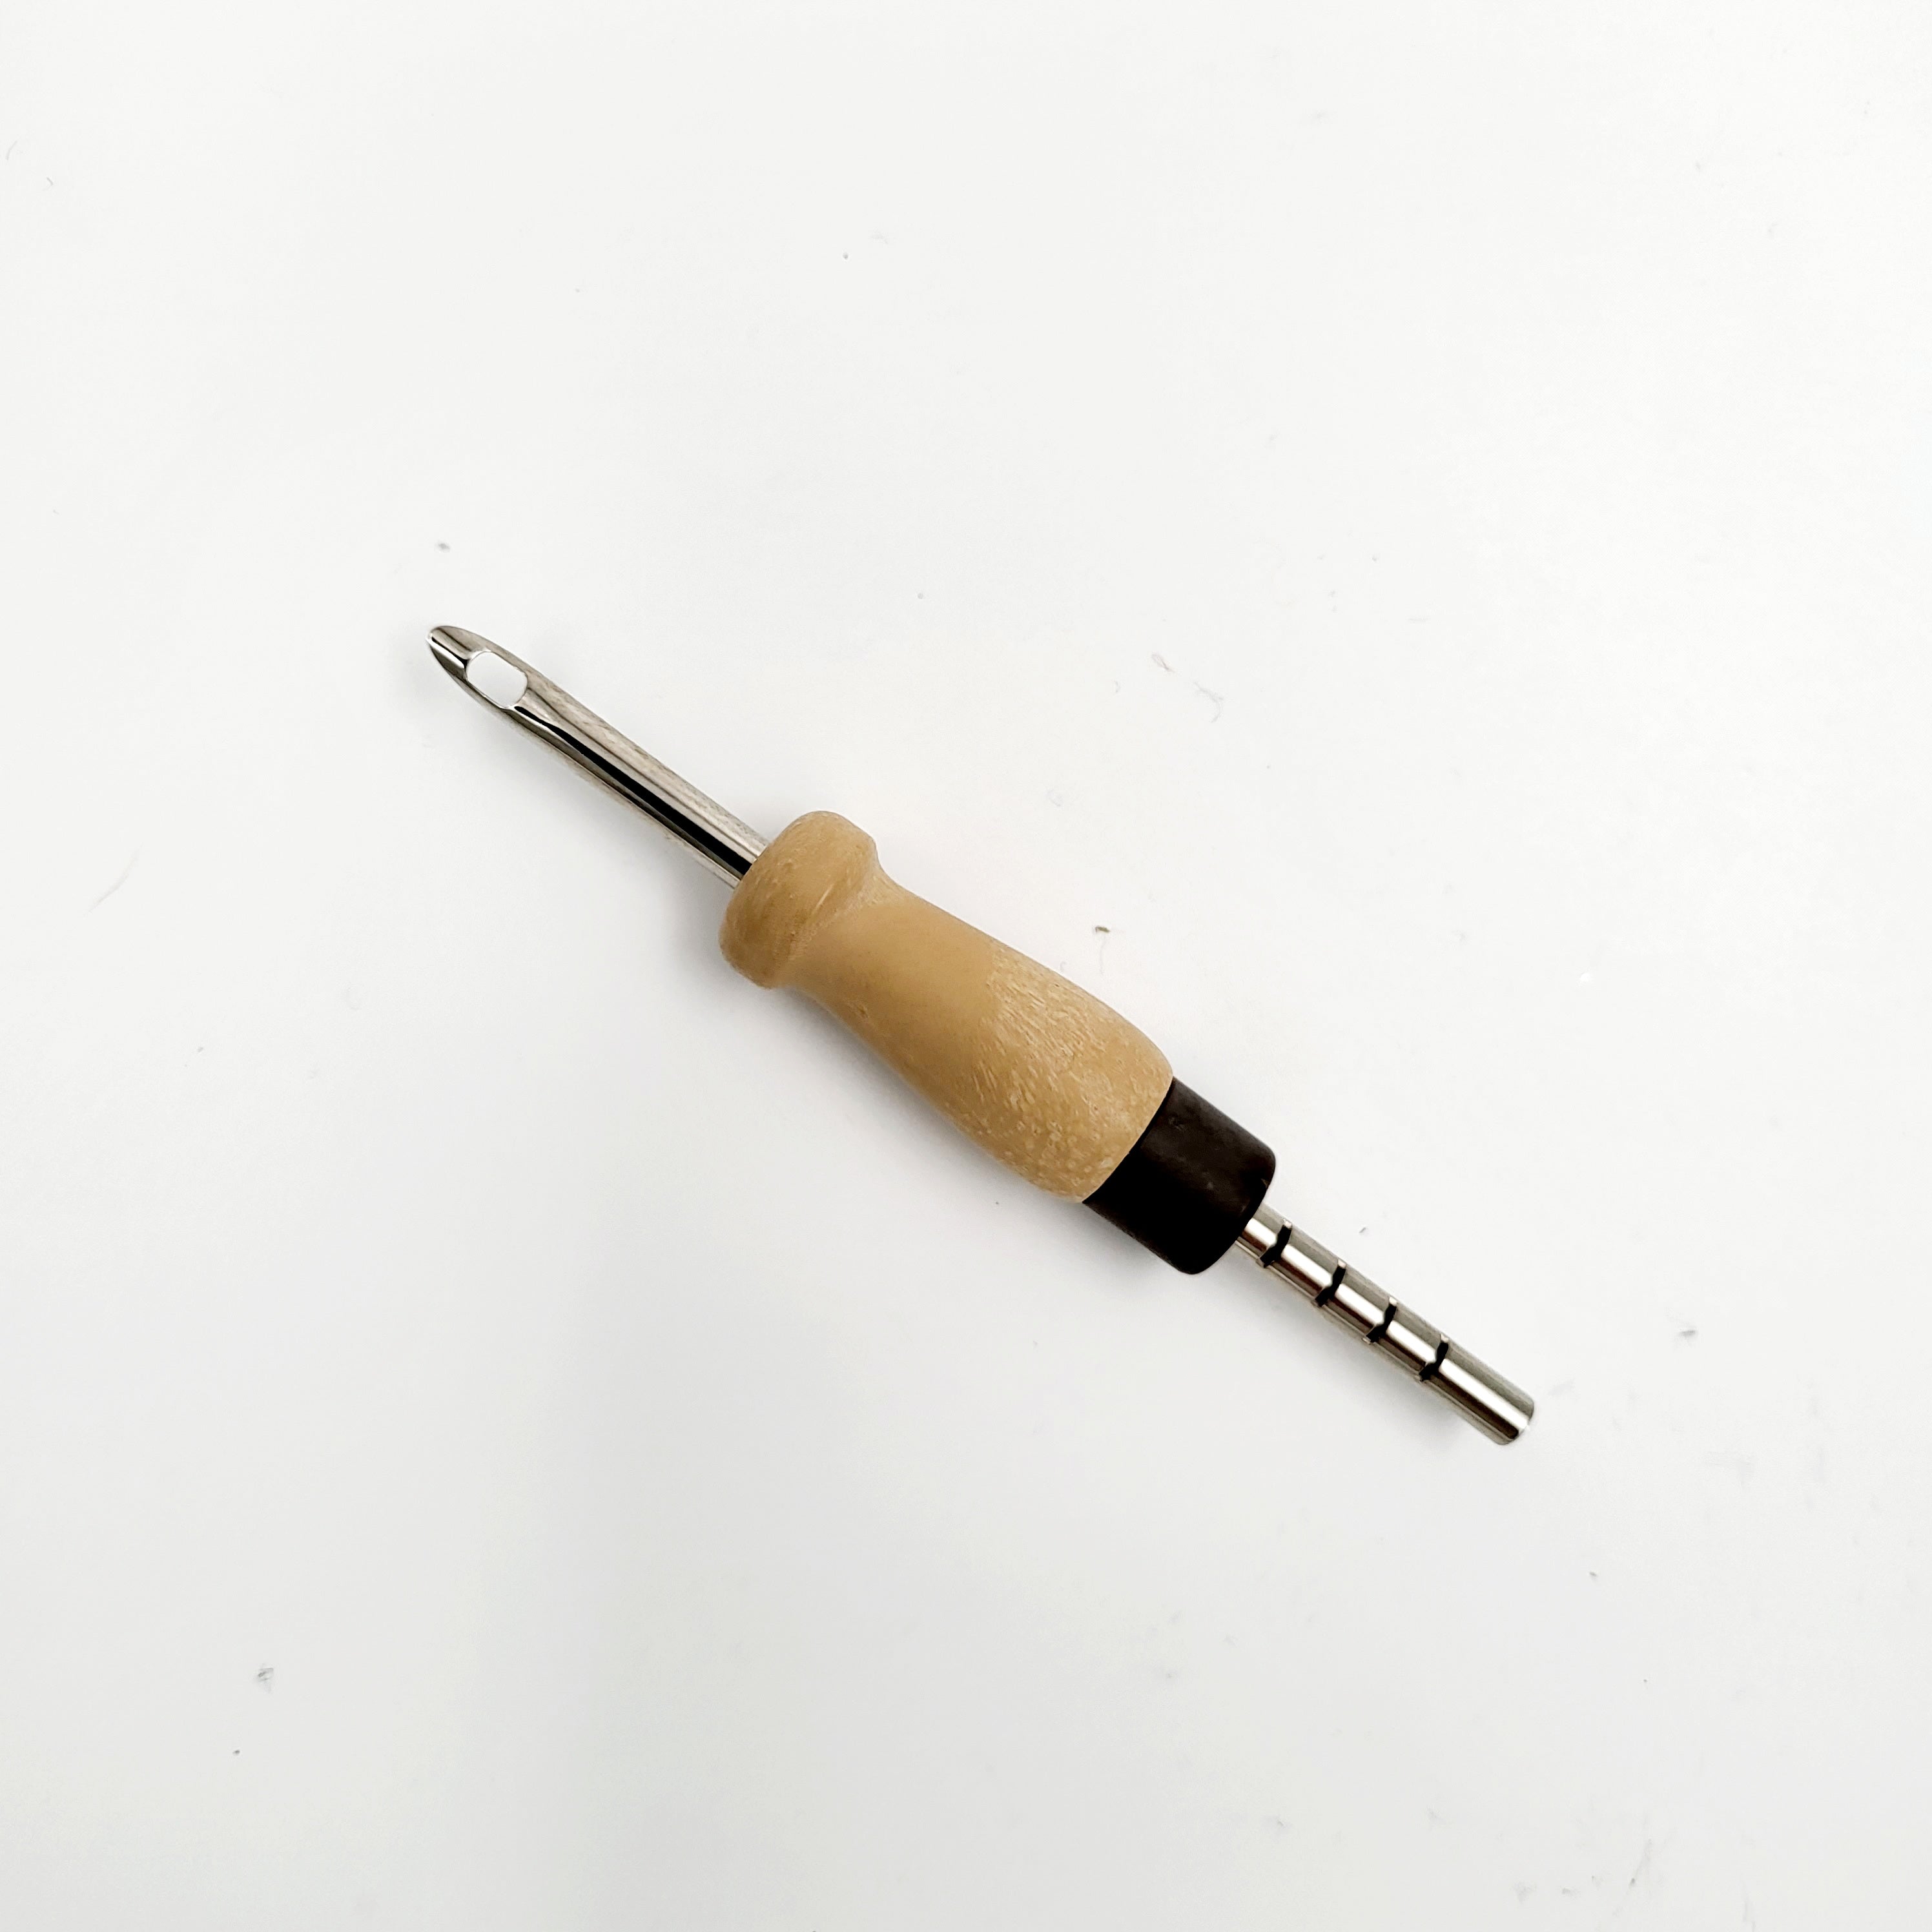 Lavor 4 mm adjustable punch needle – Whole Punching